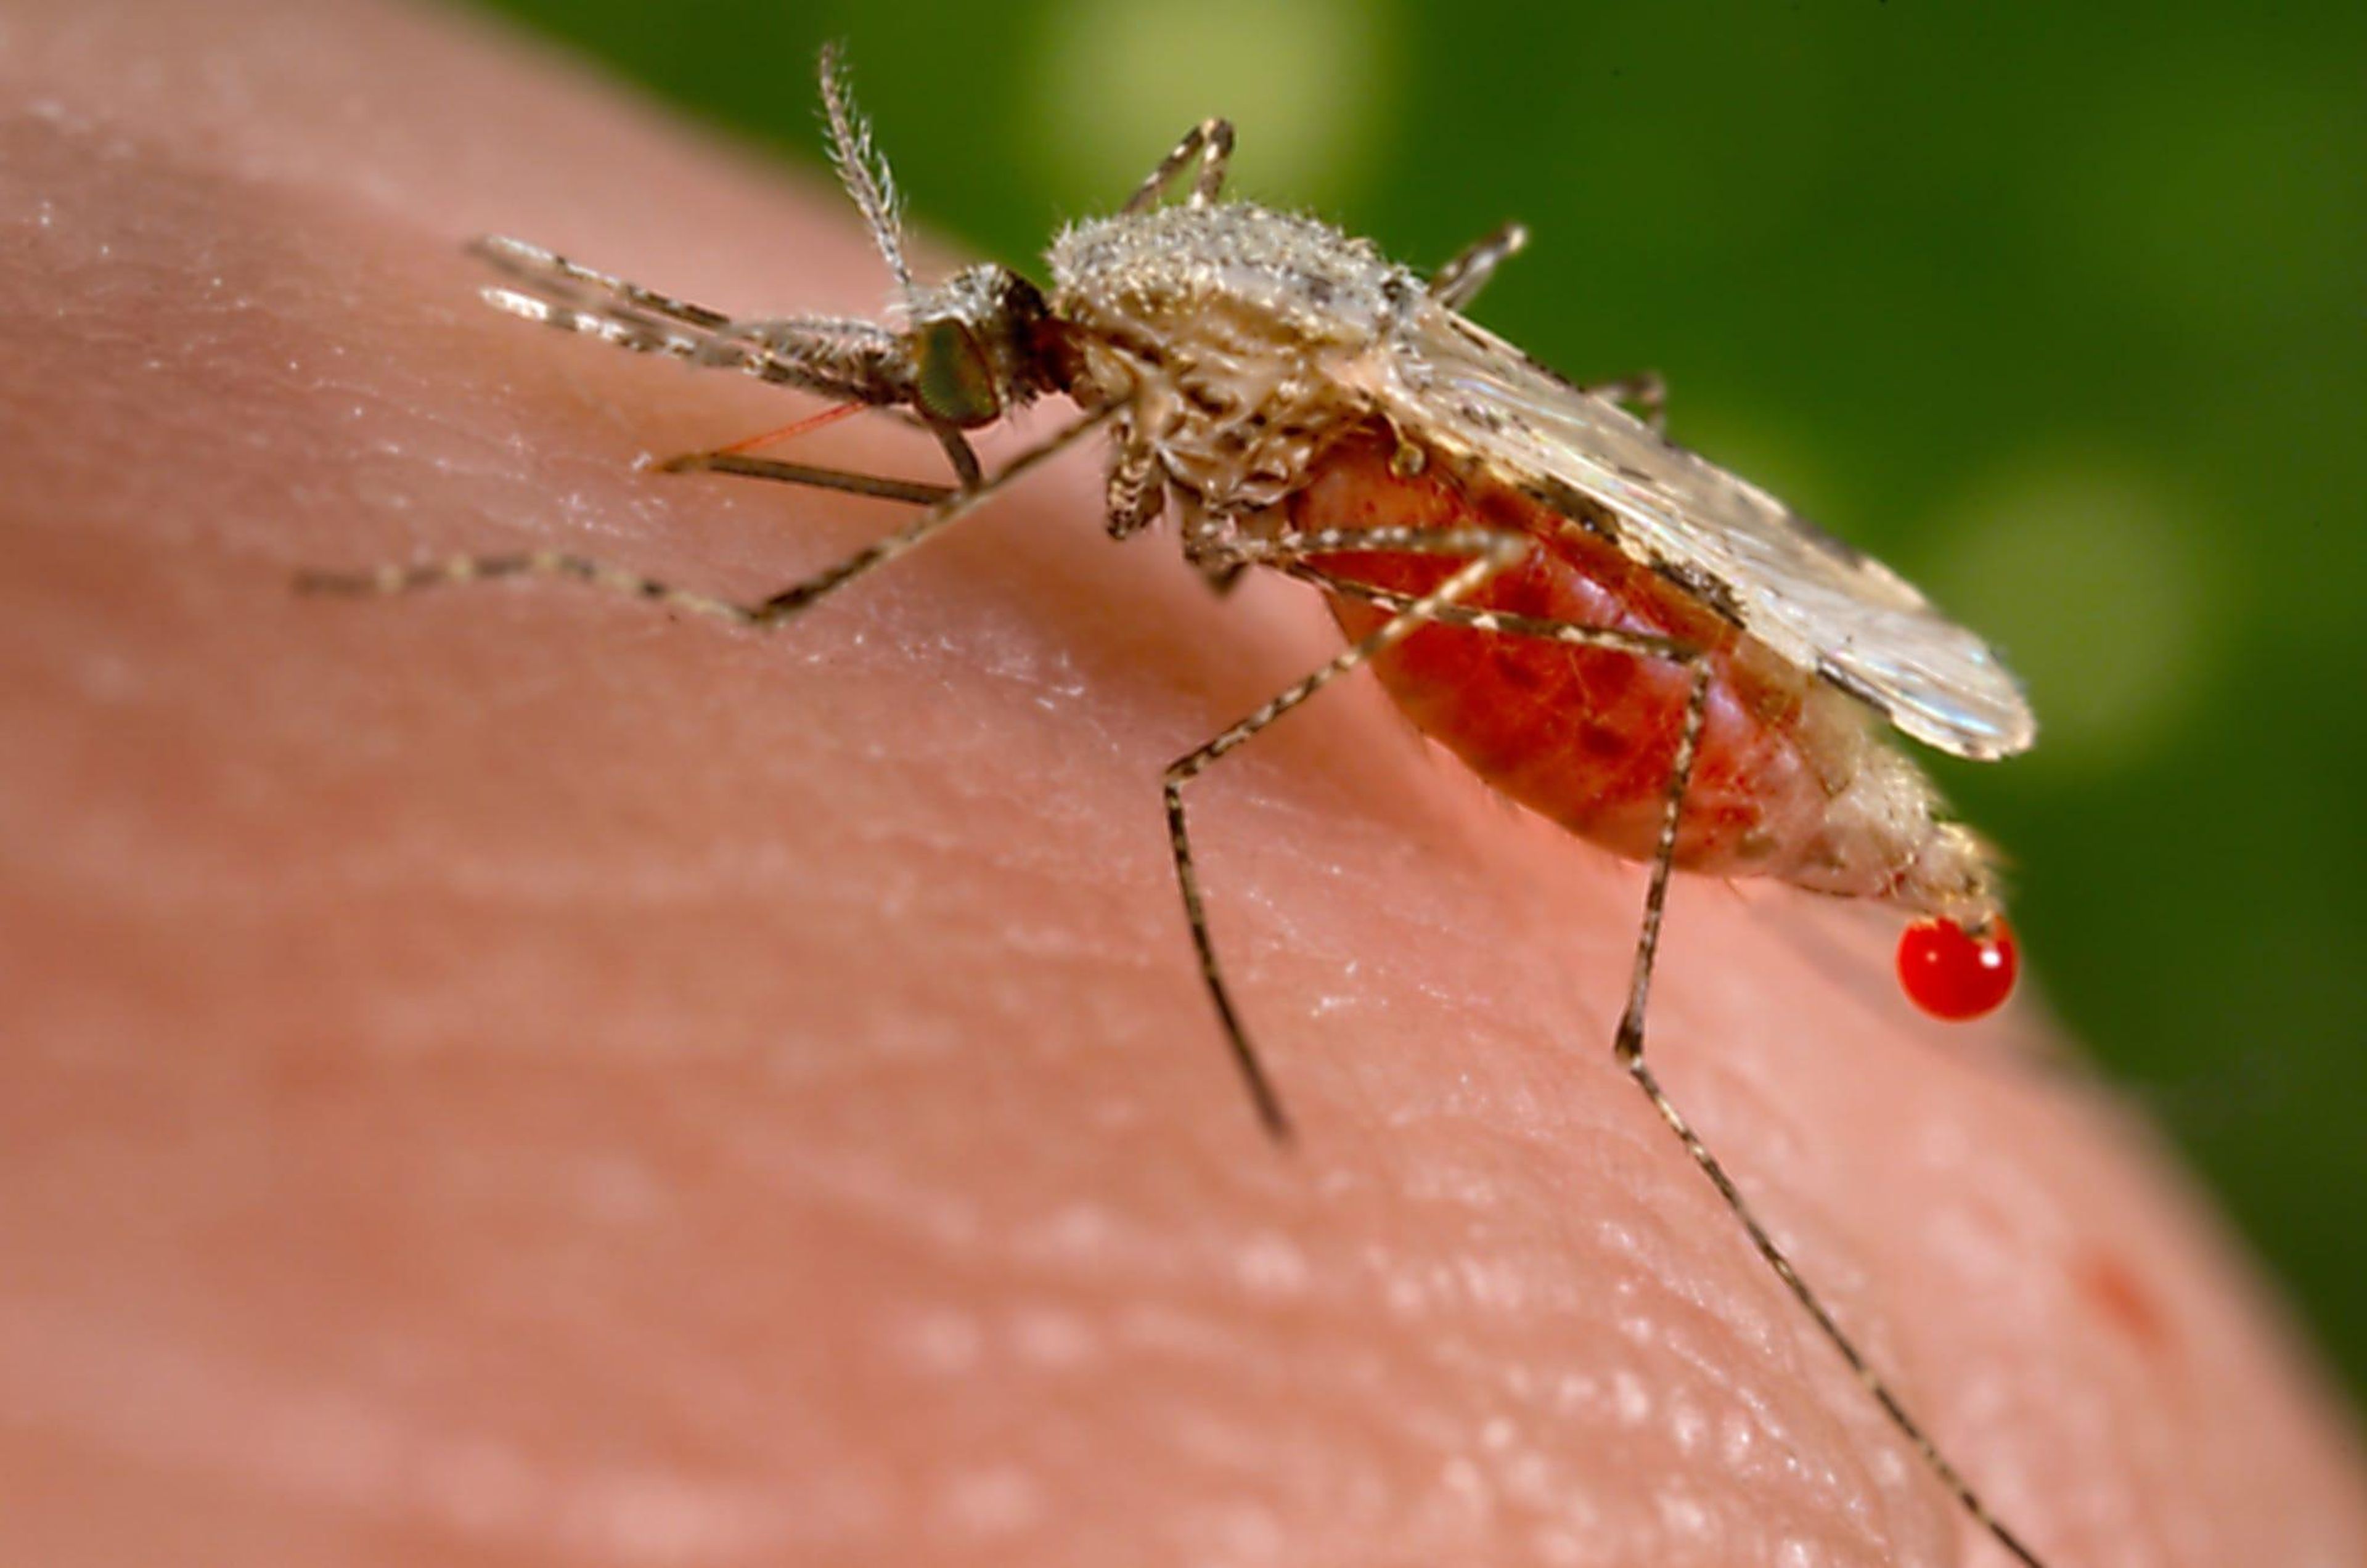 Anopheles stephensi mosquito feeding on a human host, droplet of blood expelled from the mosquito abdomen, close-up view.